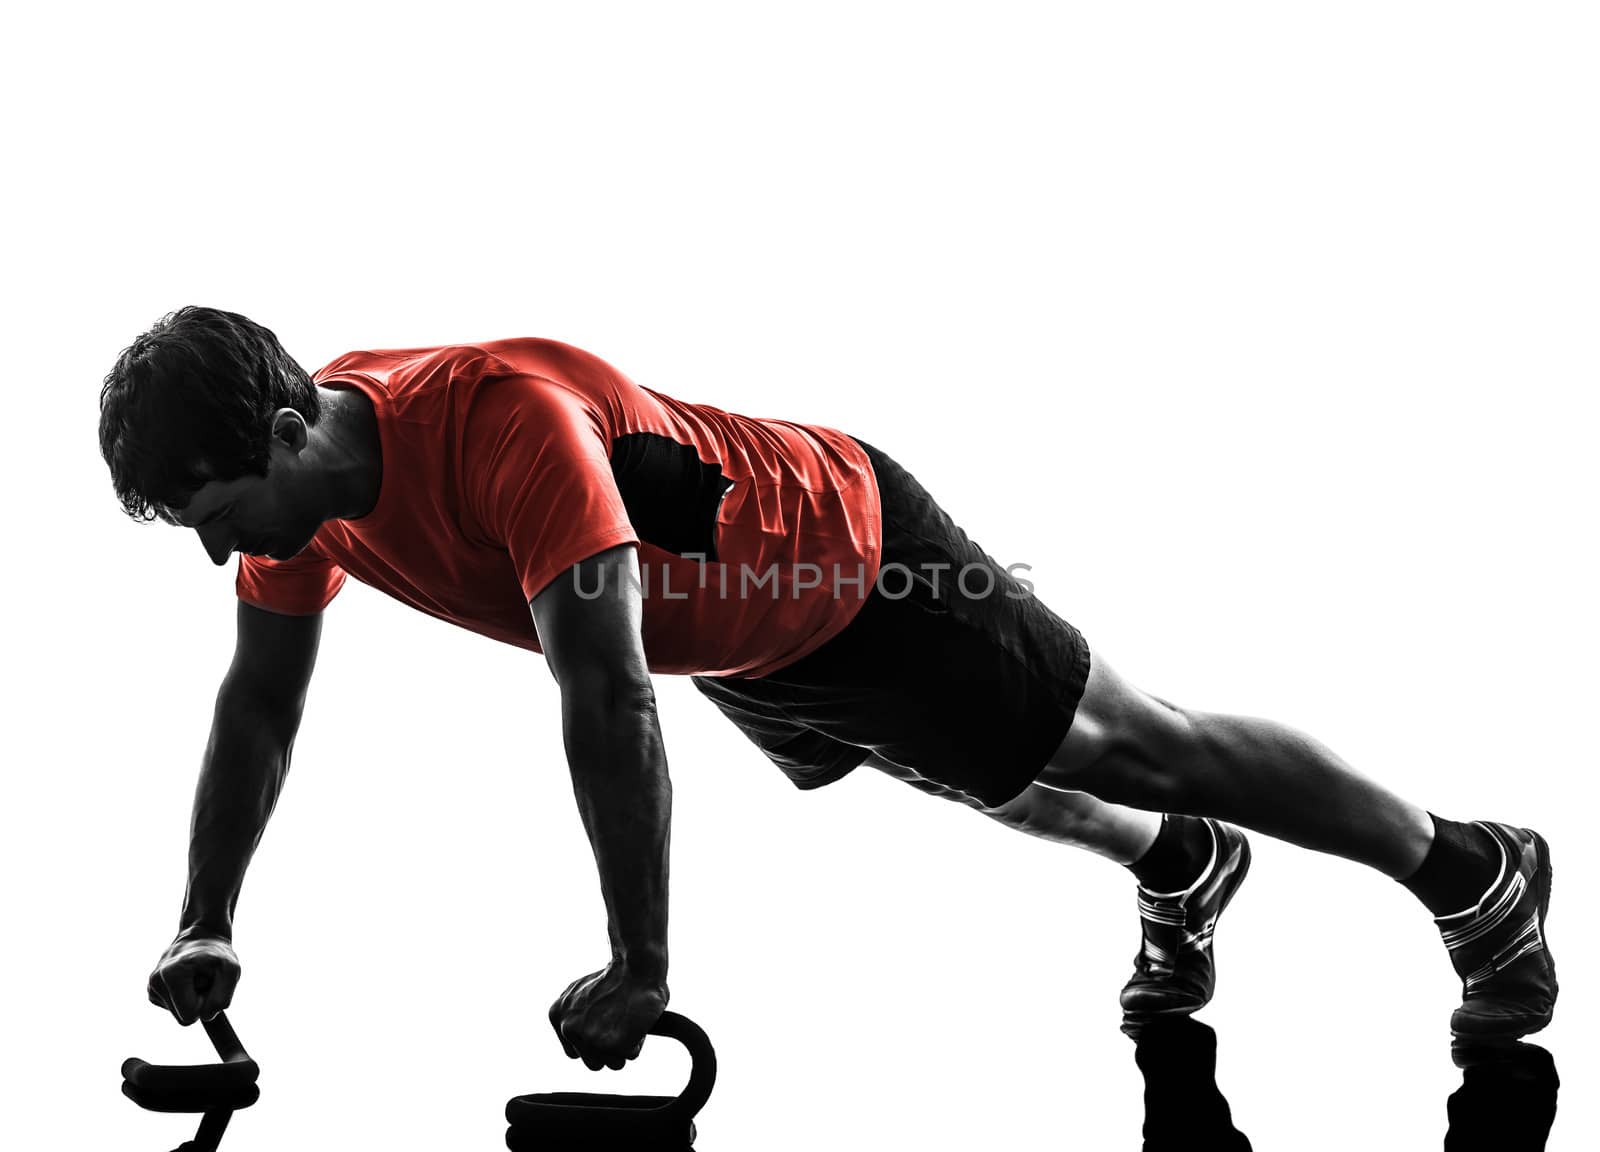 one man exercising fitness workout push ups in silhouette on white background